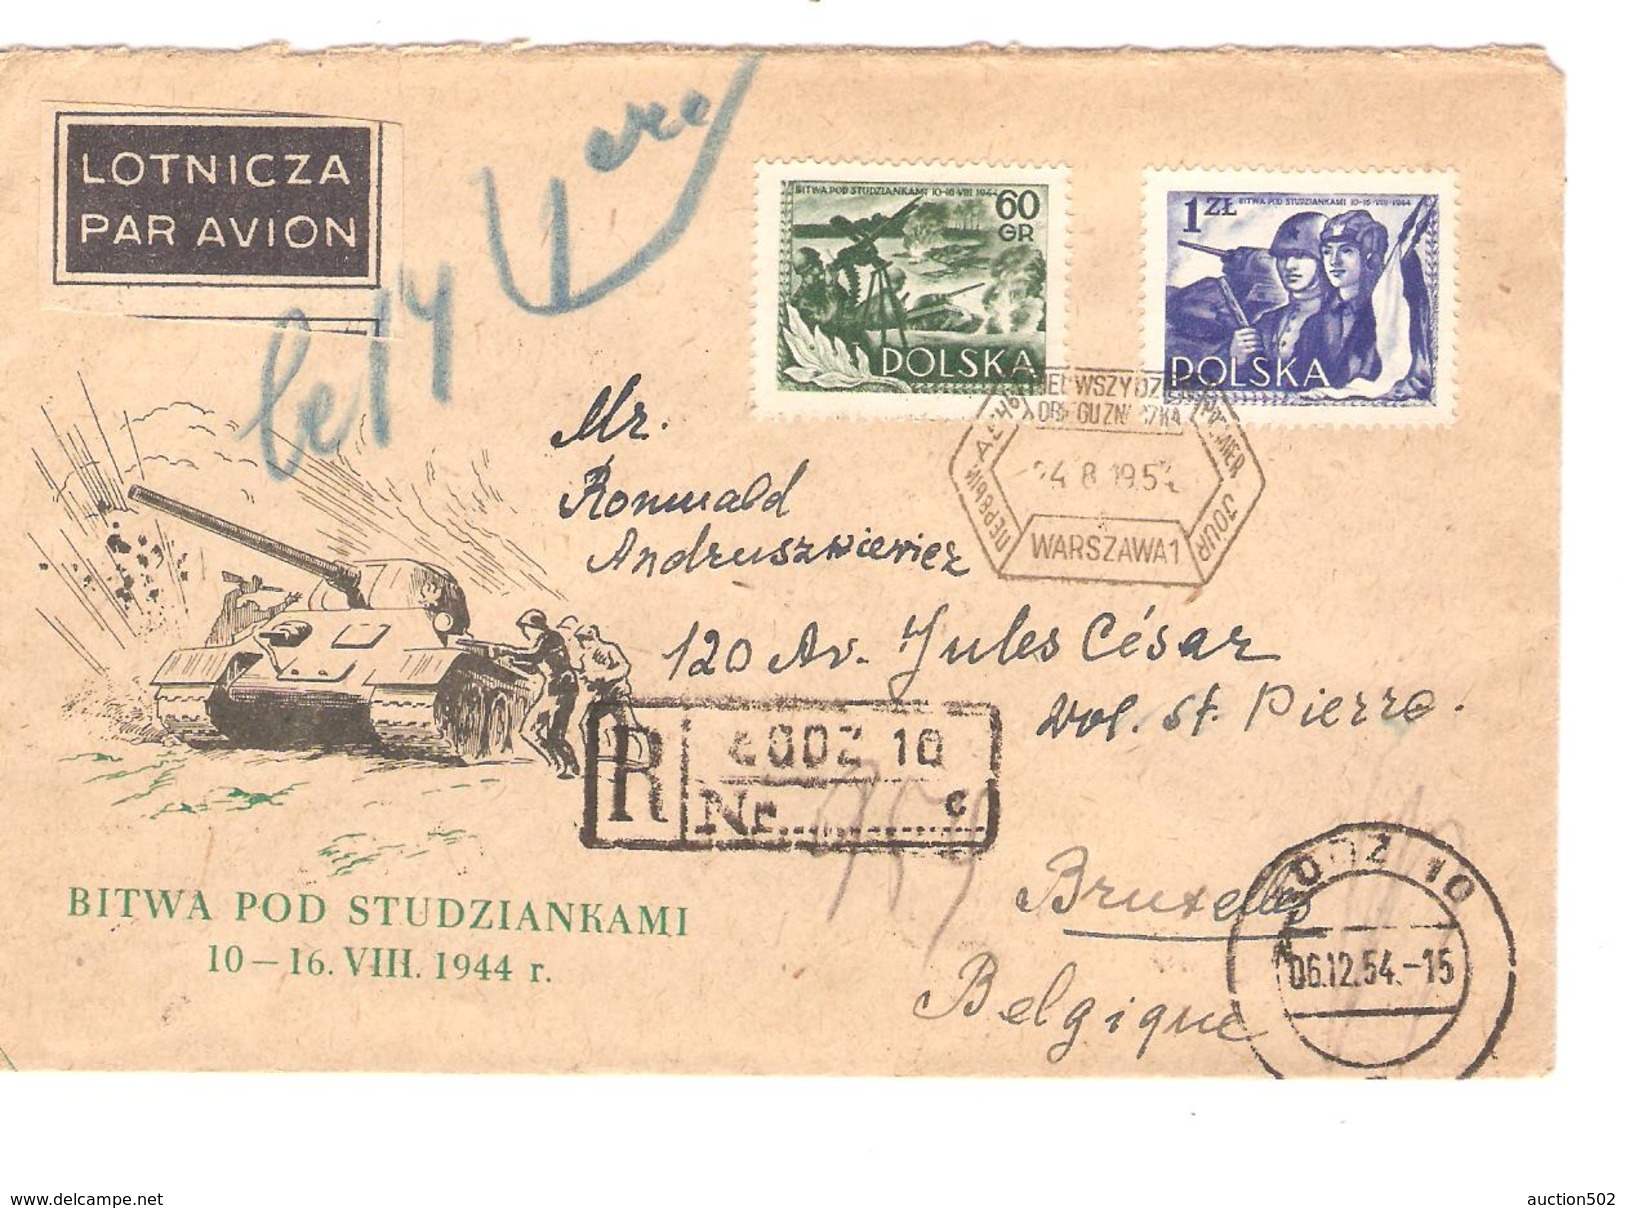 Polska-Pologne Air Mail Registered Cover Lodz 1954 Tank Soldier To Brussels Belgium PR3907 - Lettres & Documents